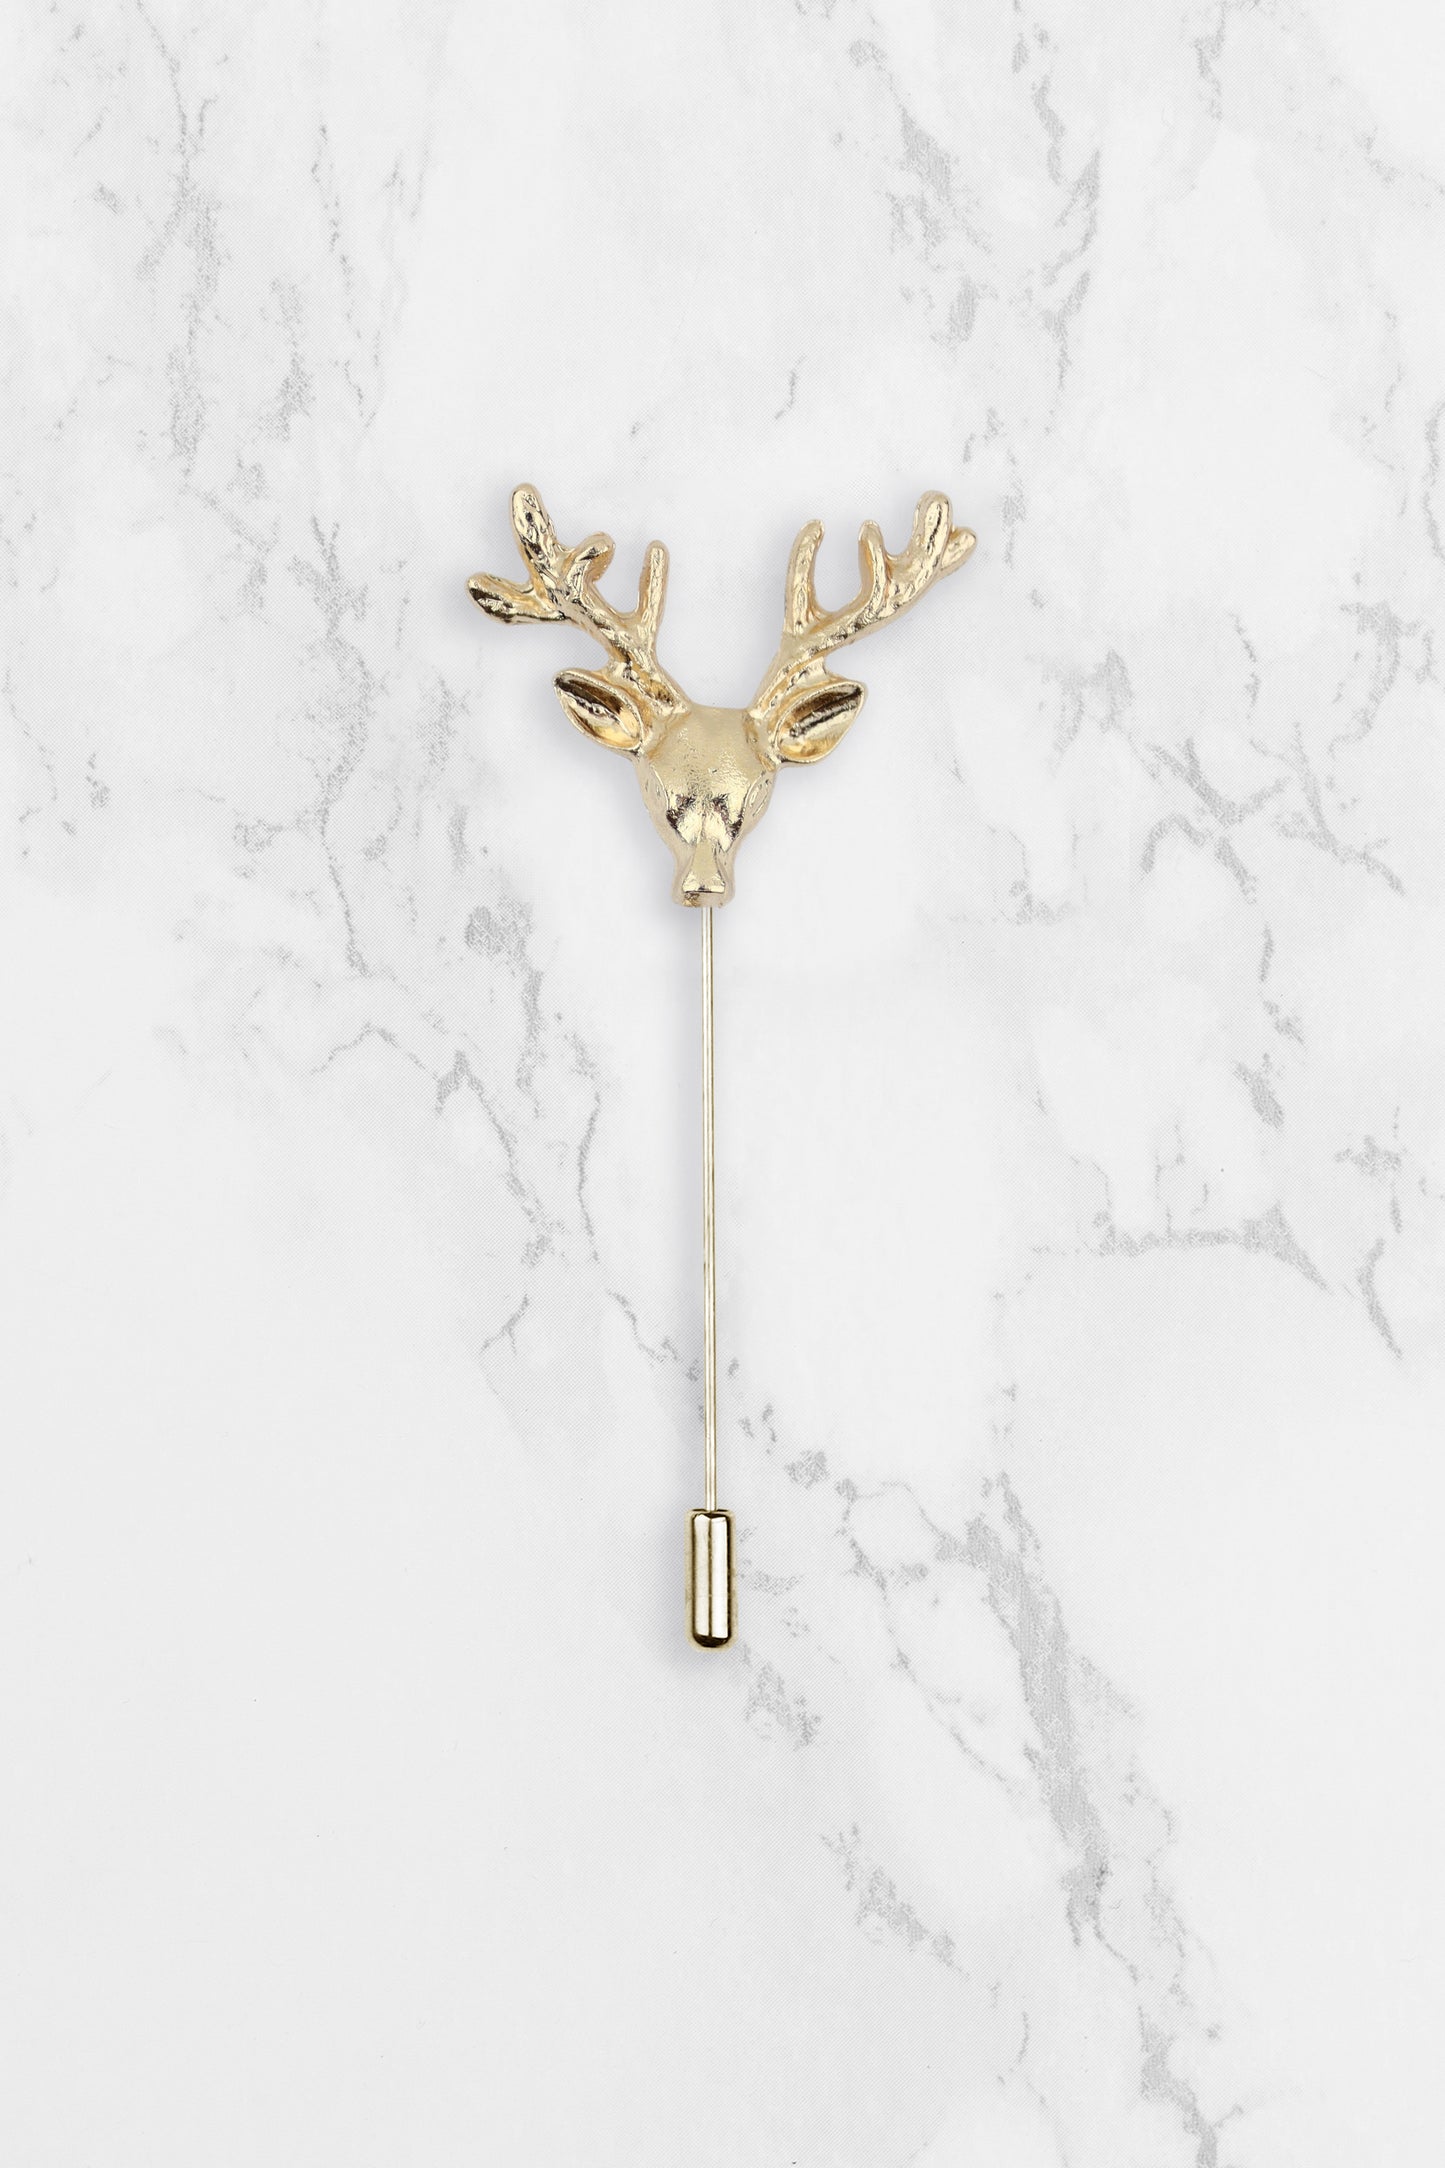 Stag Head Lapel Pin - Gold